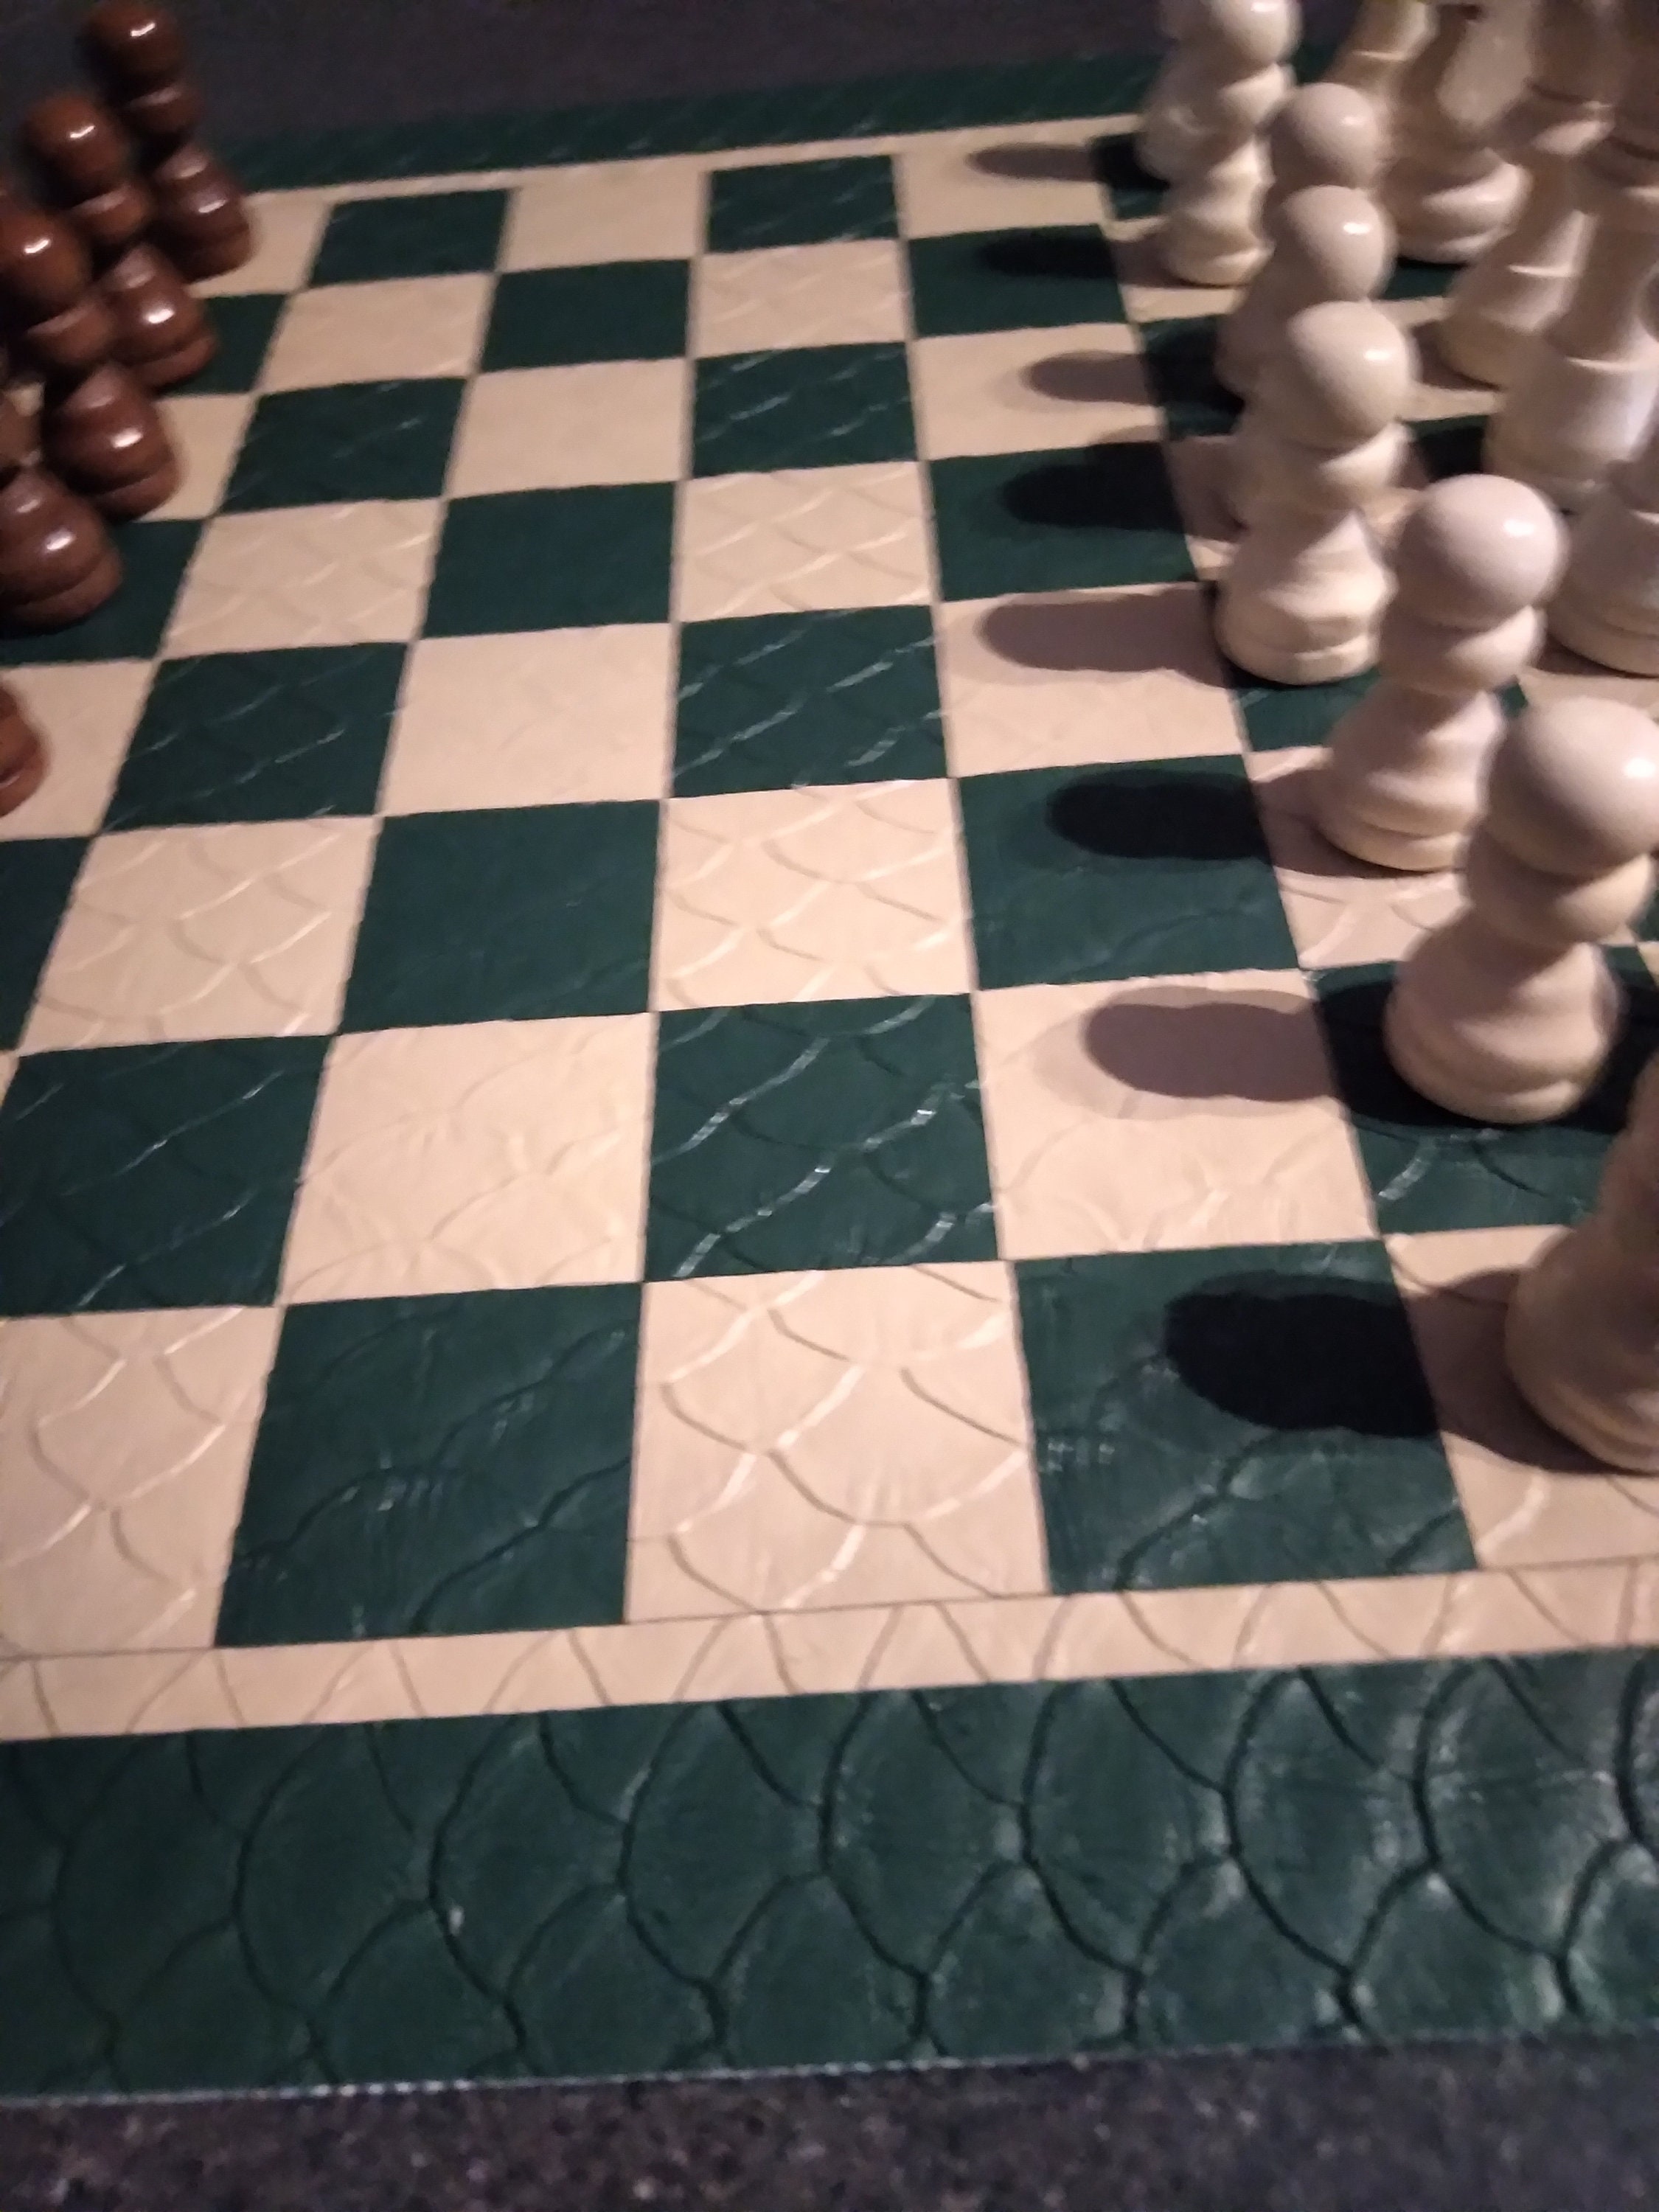 Chess Board Game Made in Skai by Me 